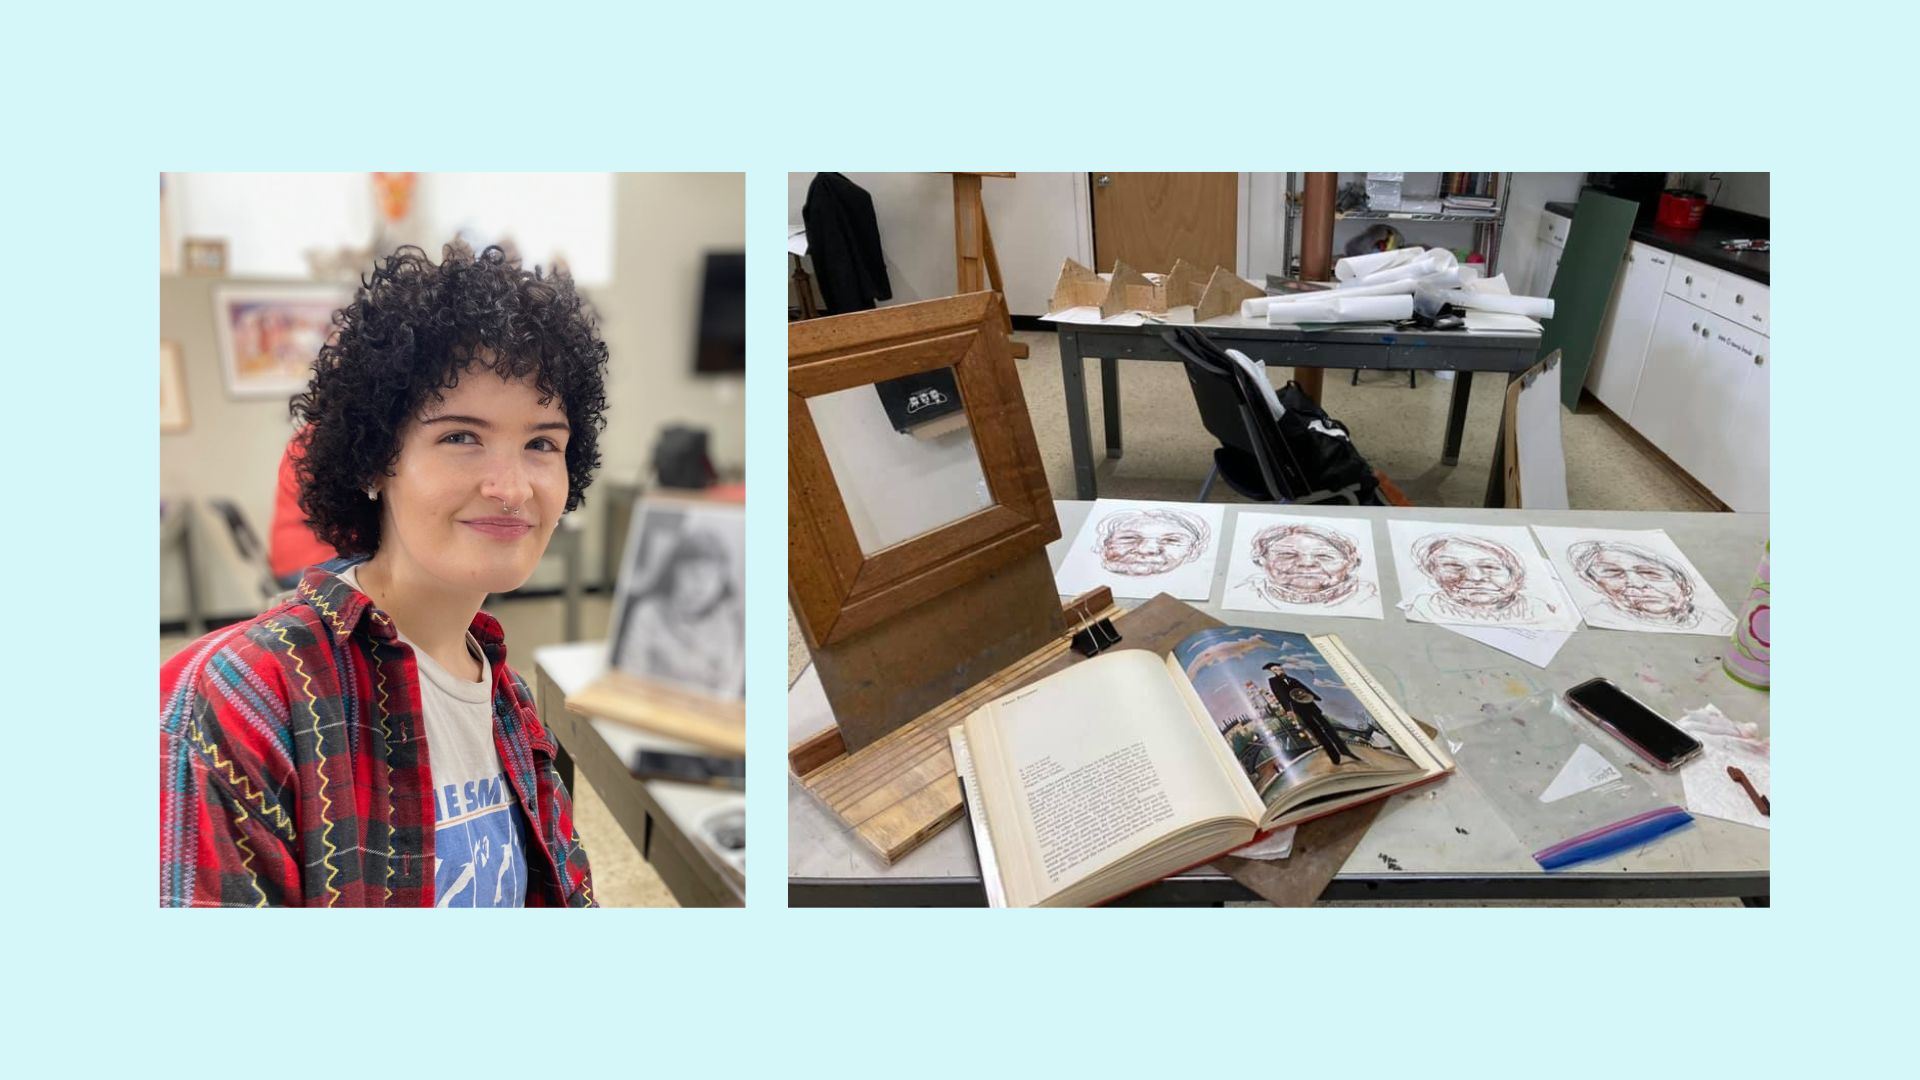 Studio scene with books and drawings of faces. Photo of instructor